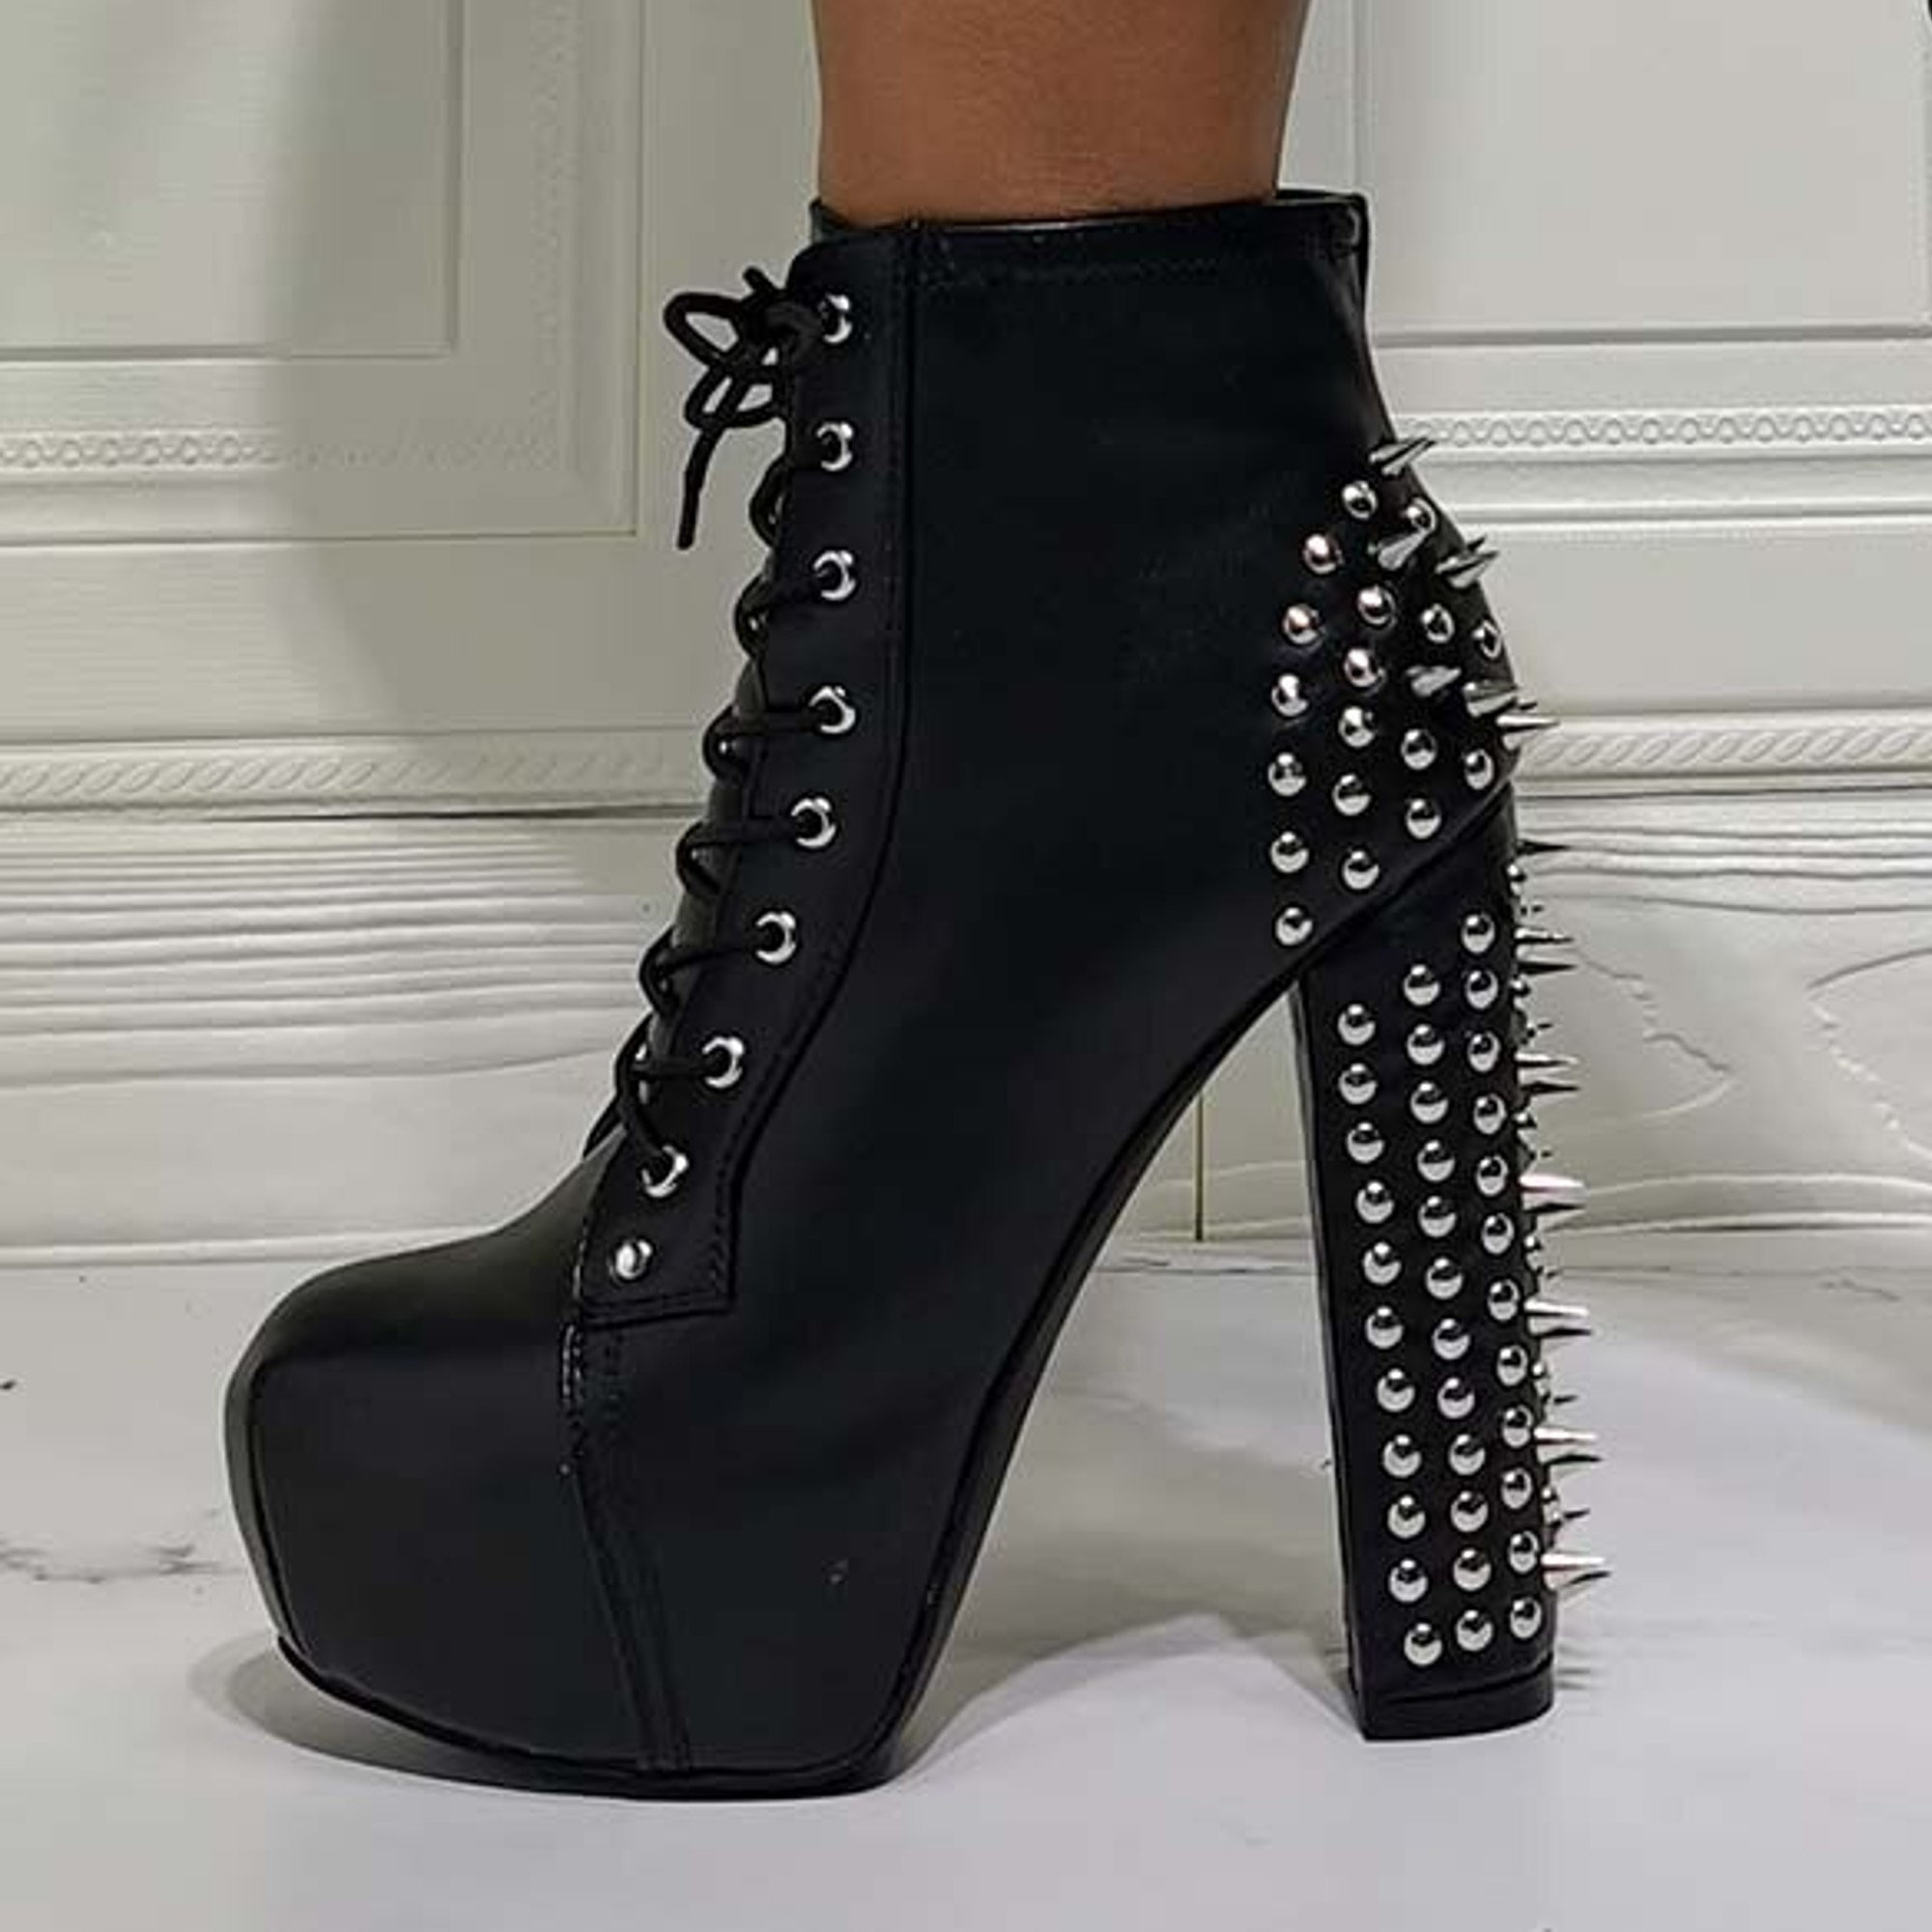 Y2K Rivetted Lace-Up Super High Heel Ankle Boots